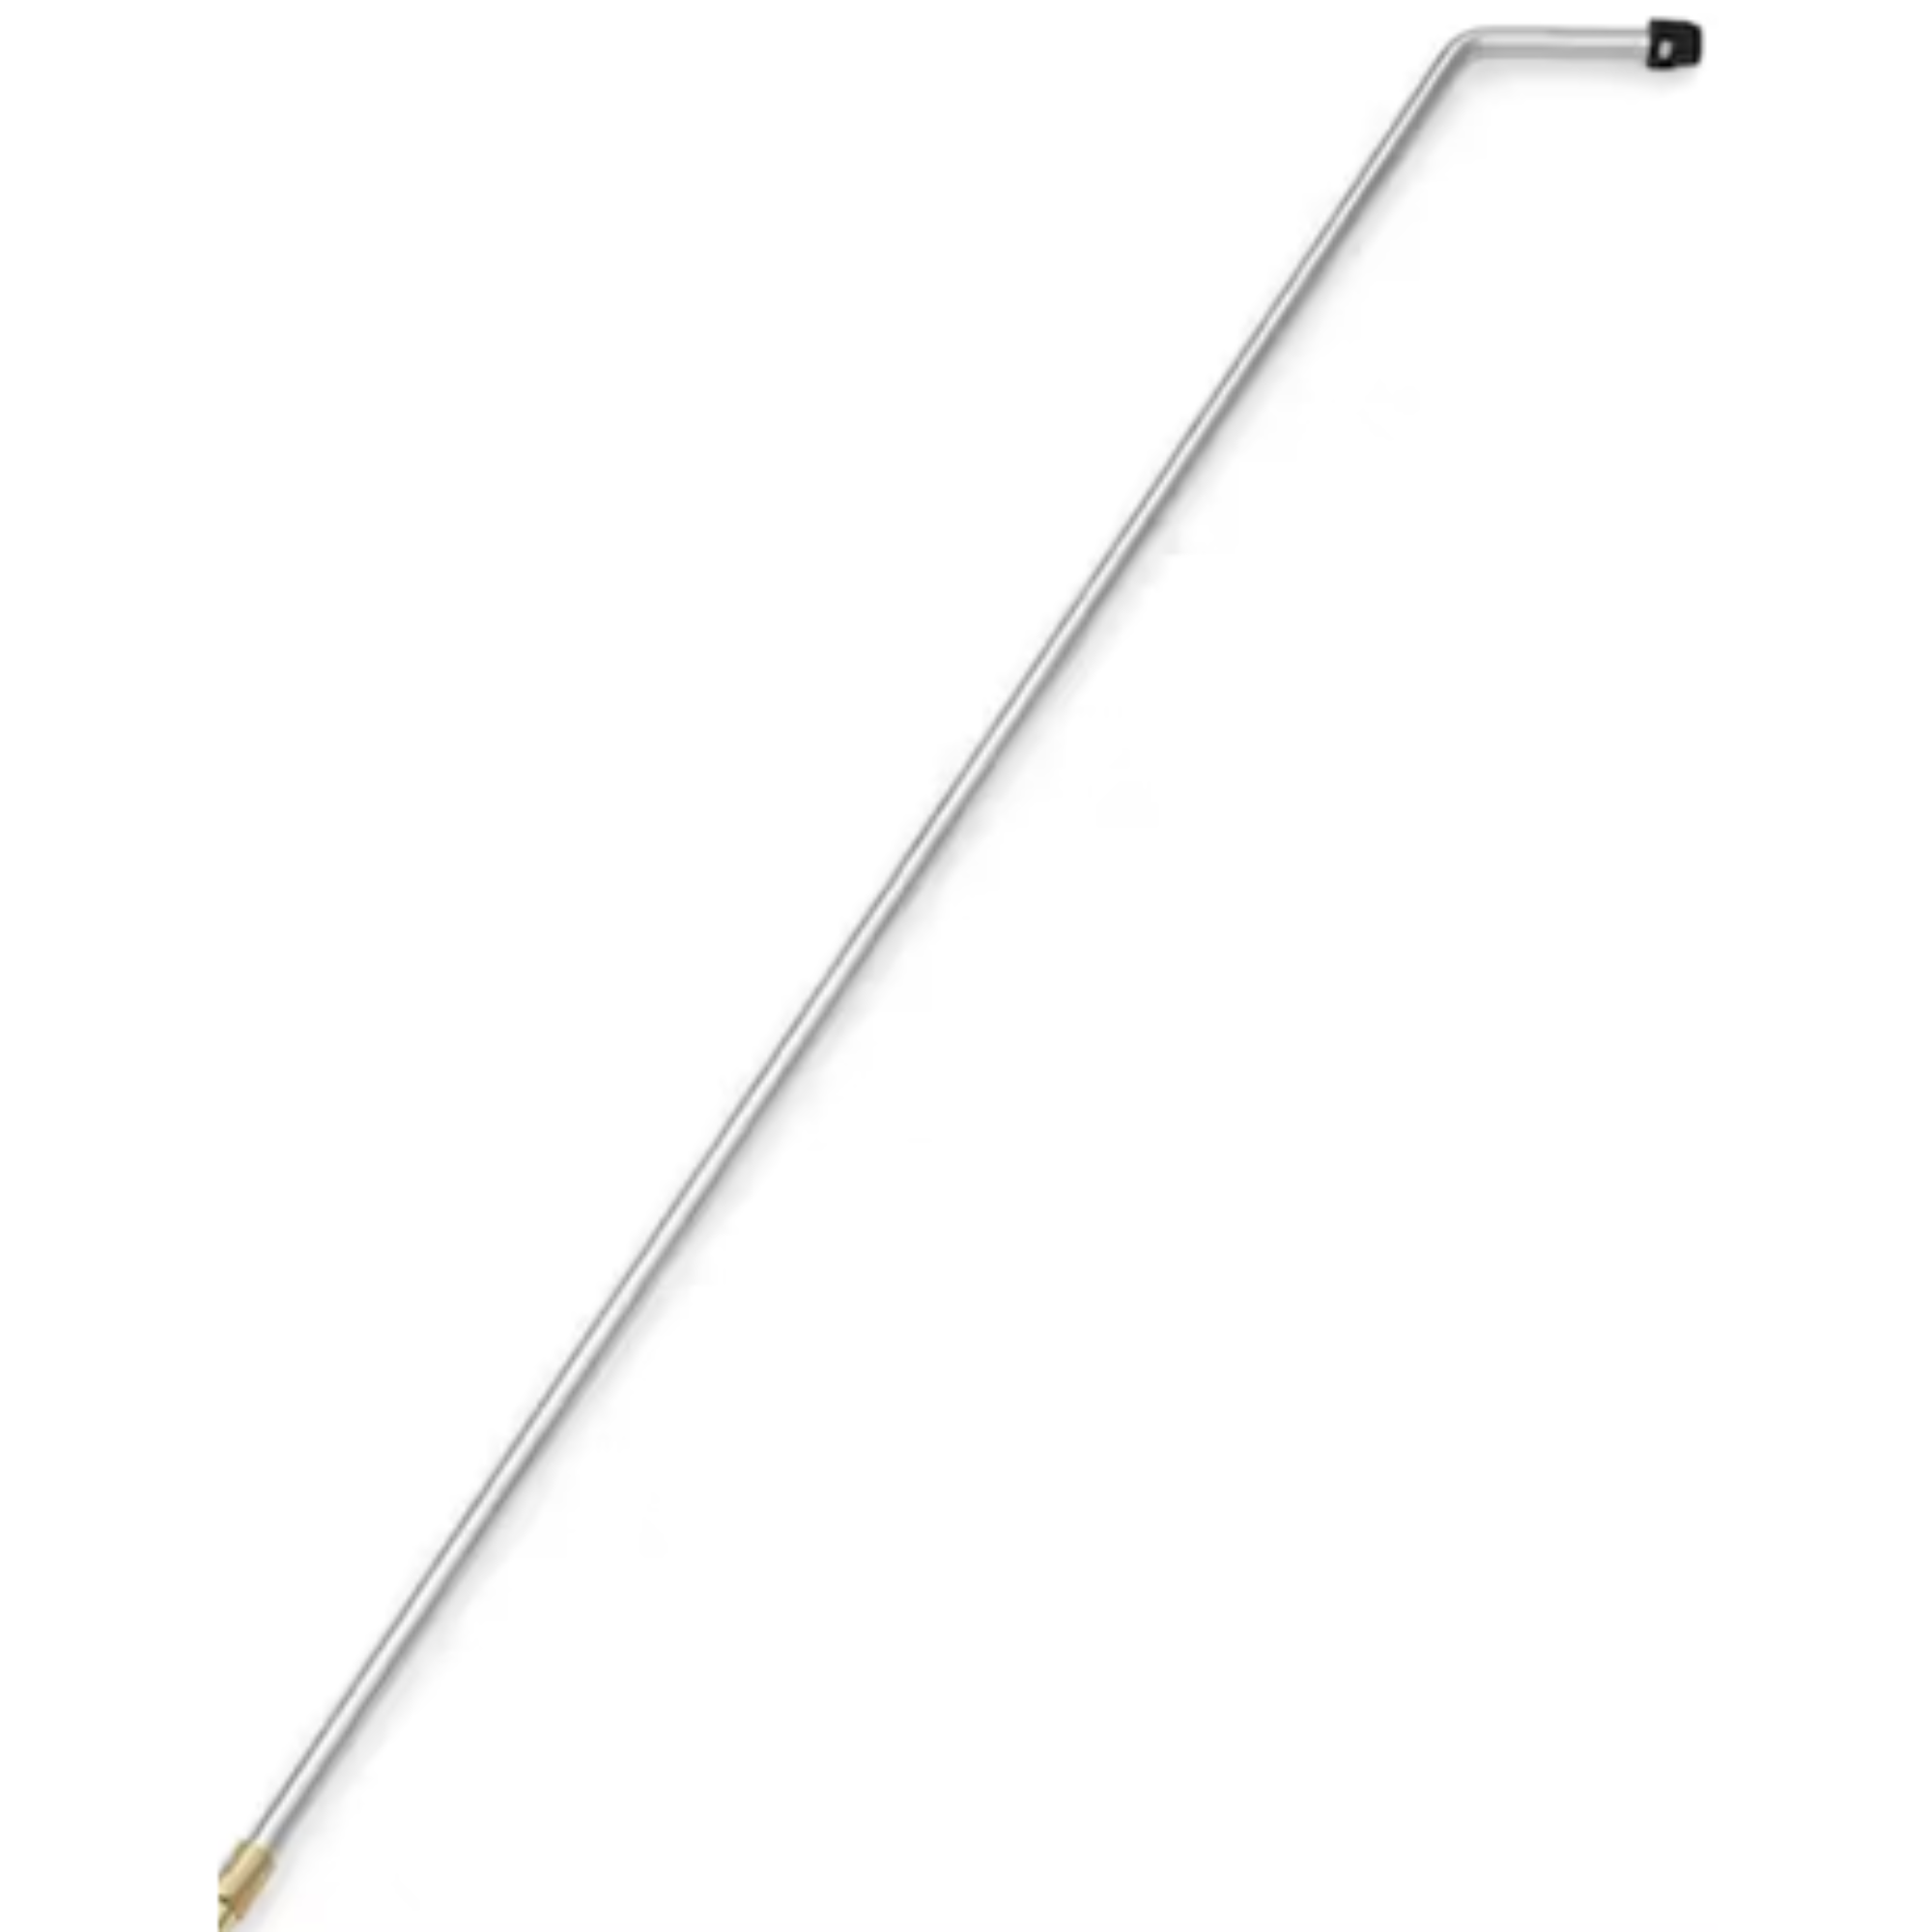 STIHL Curved Spray Lance for RE Models | 4910 500 1910